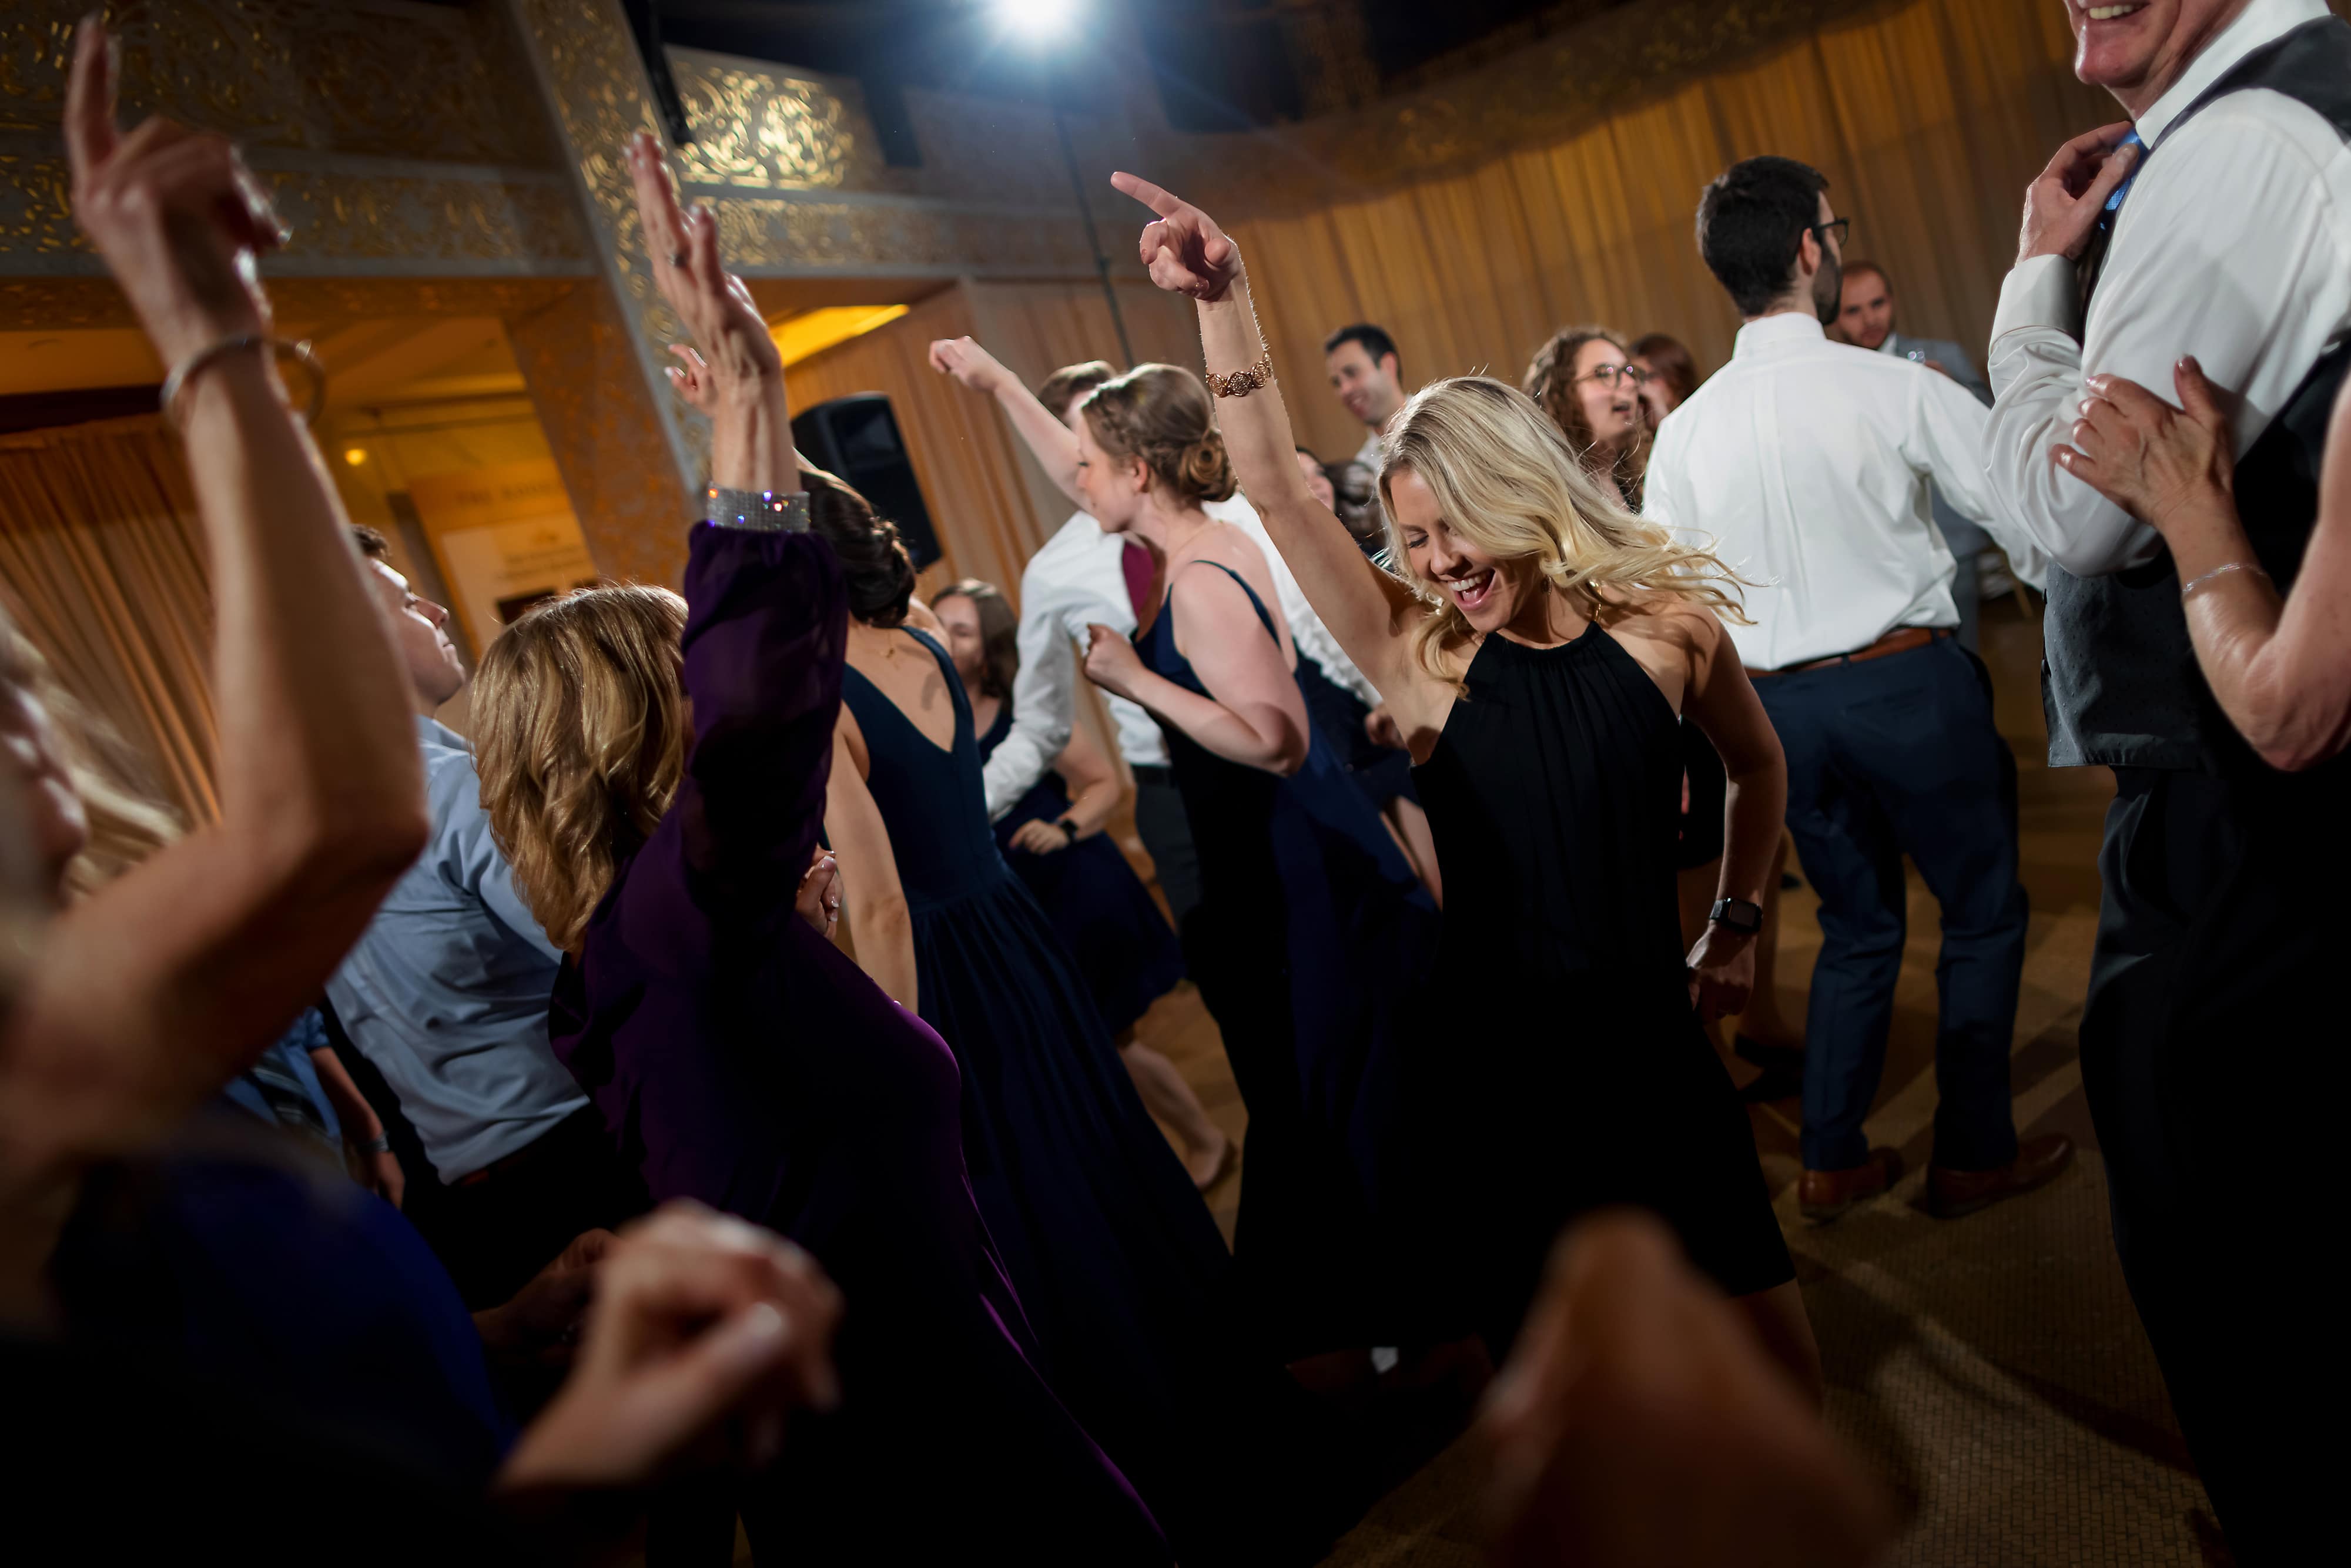 Wedding guests dance during reception at the Rookery Building in Chicago